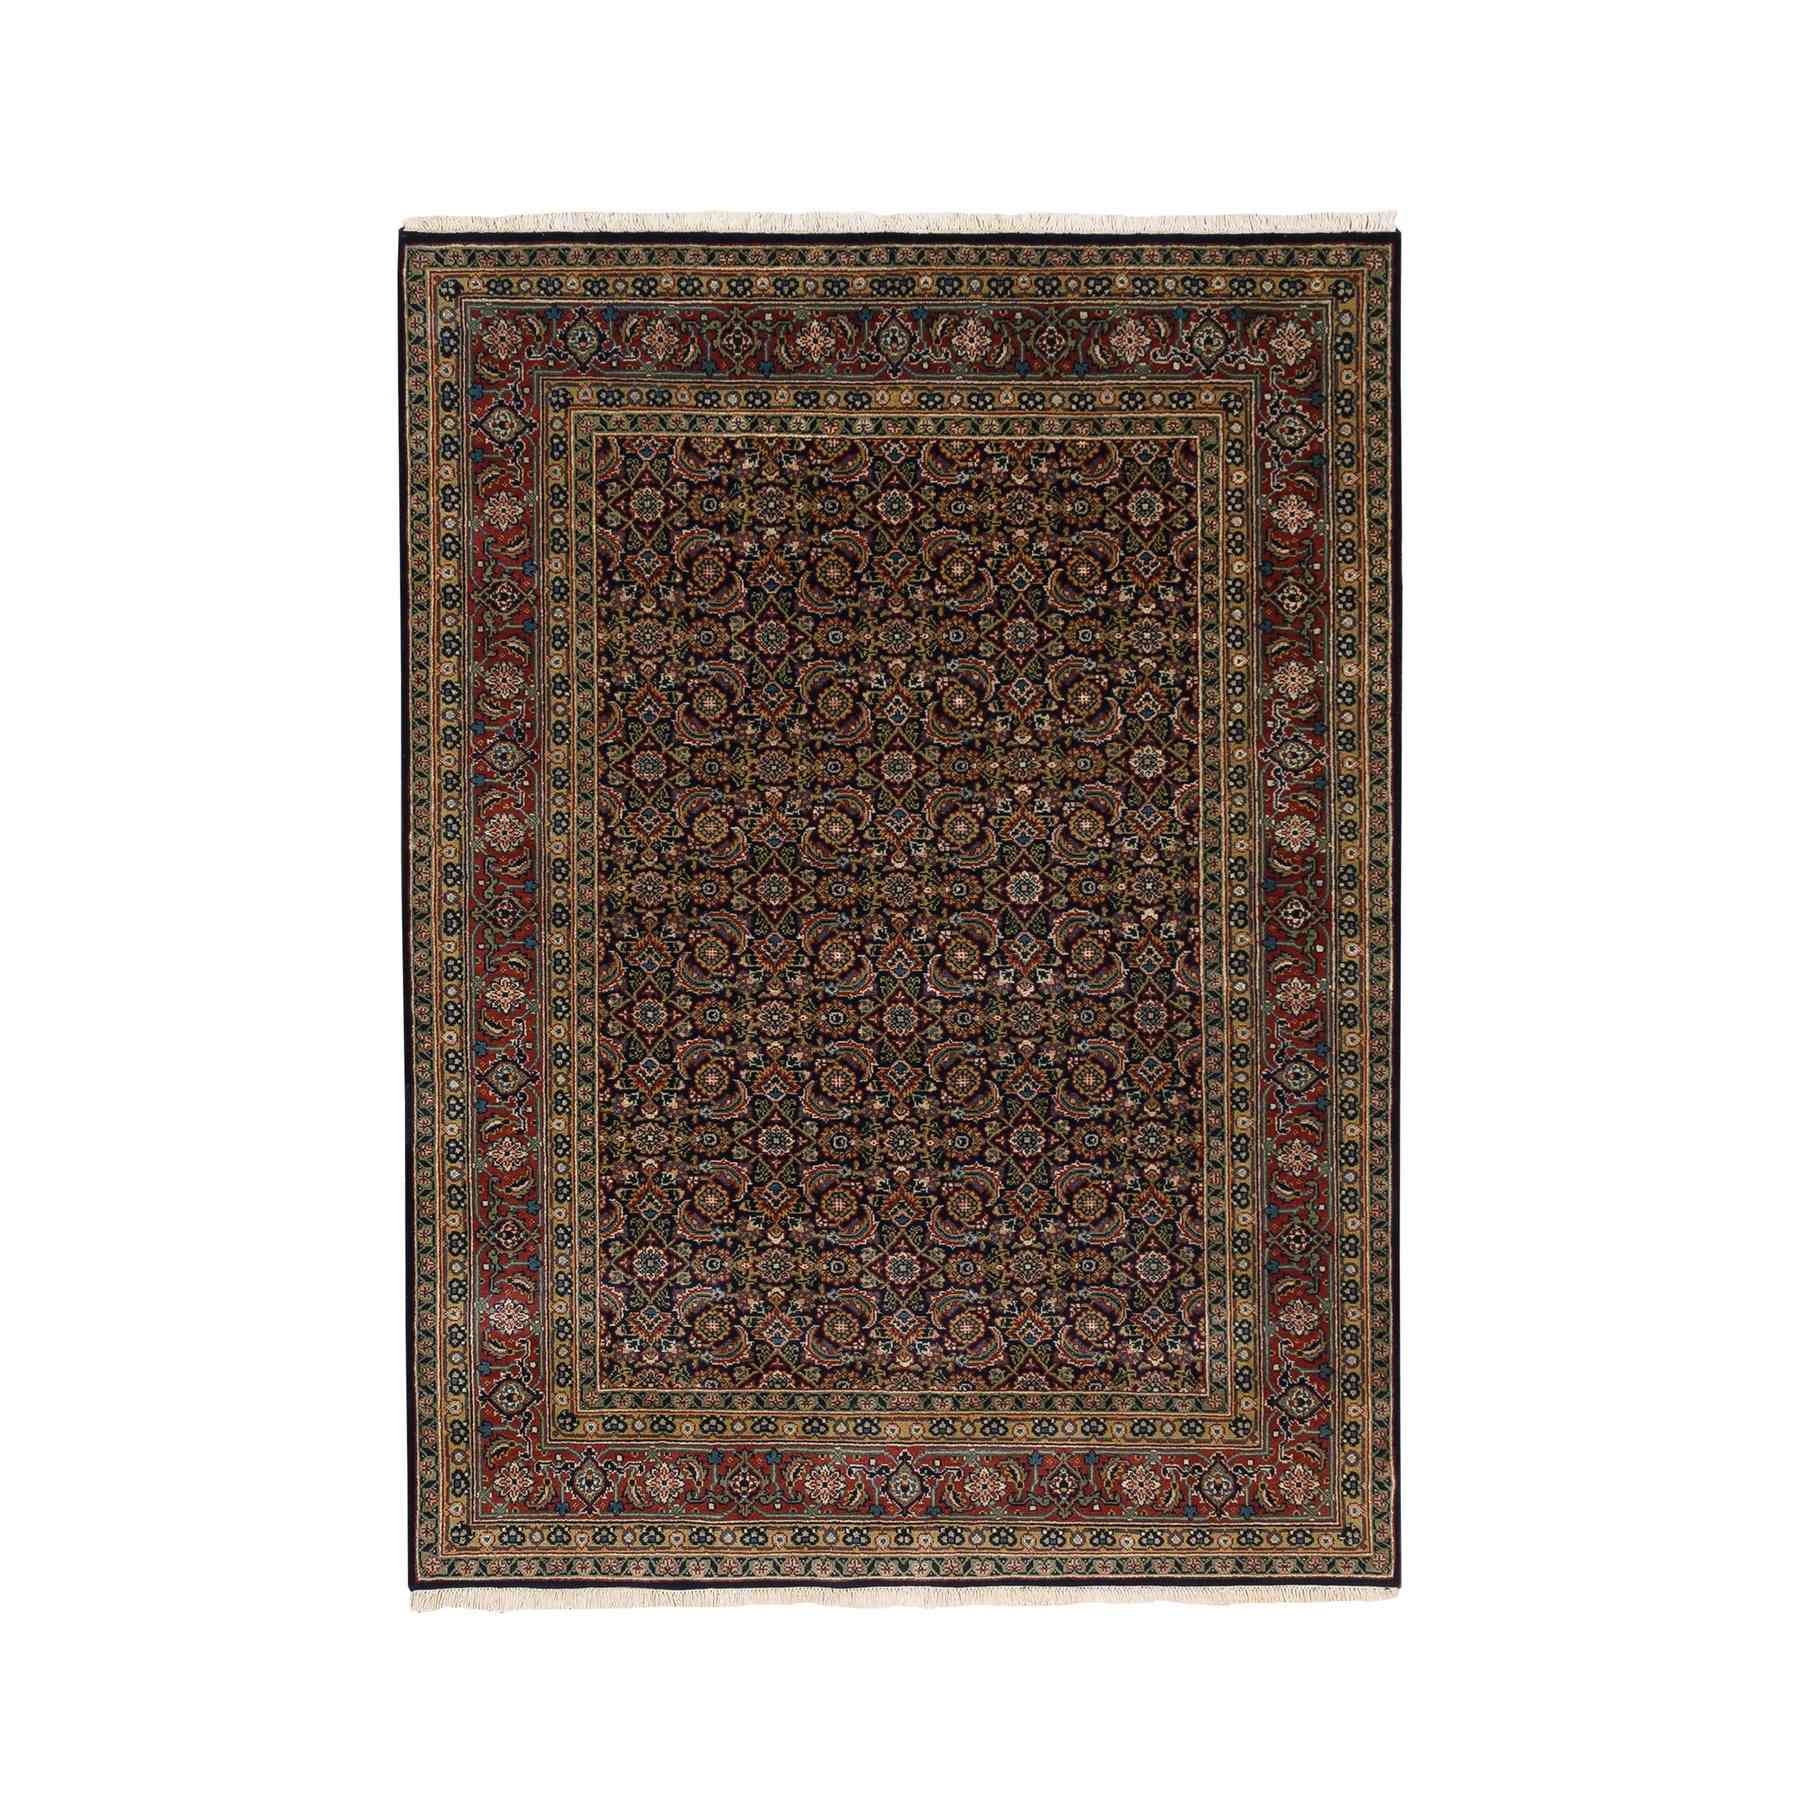 Fine-Oriental-Hand-Knotted-Rug-311705